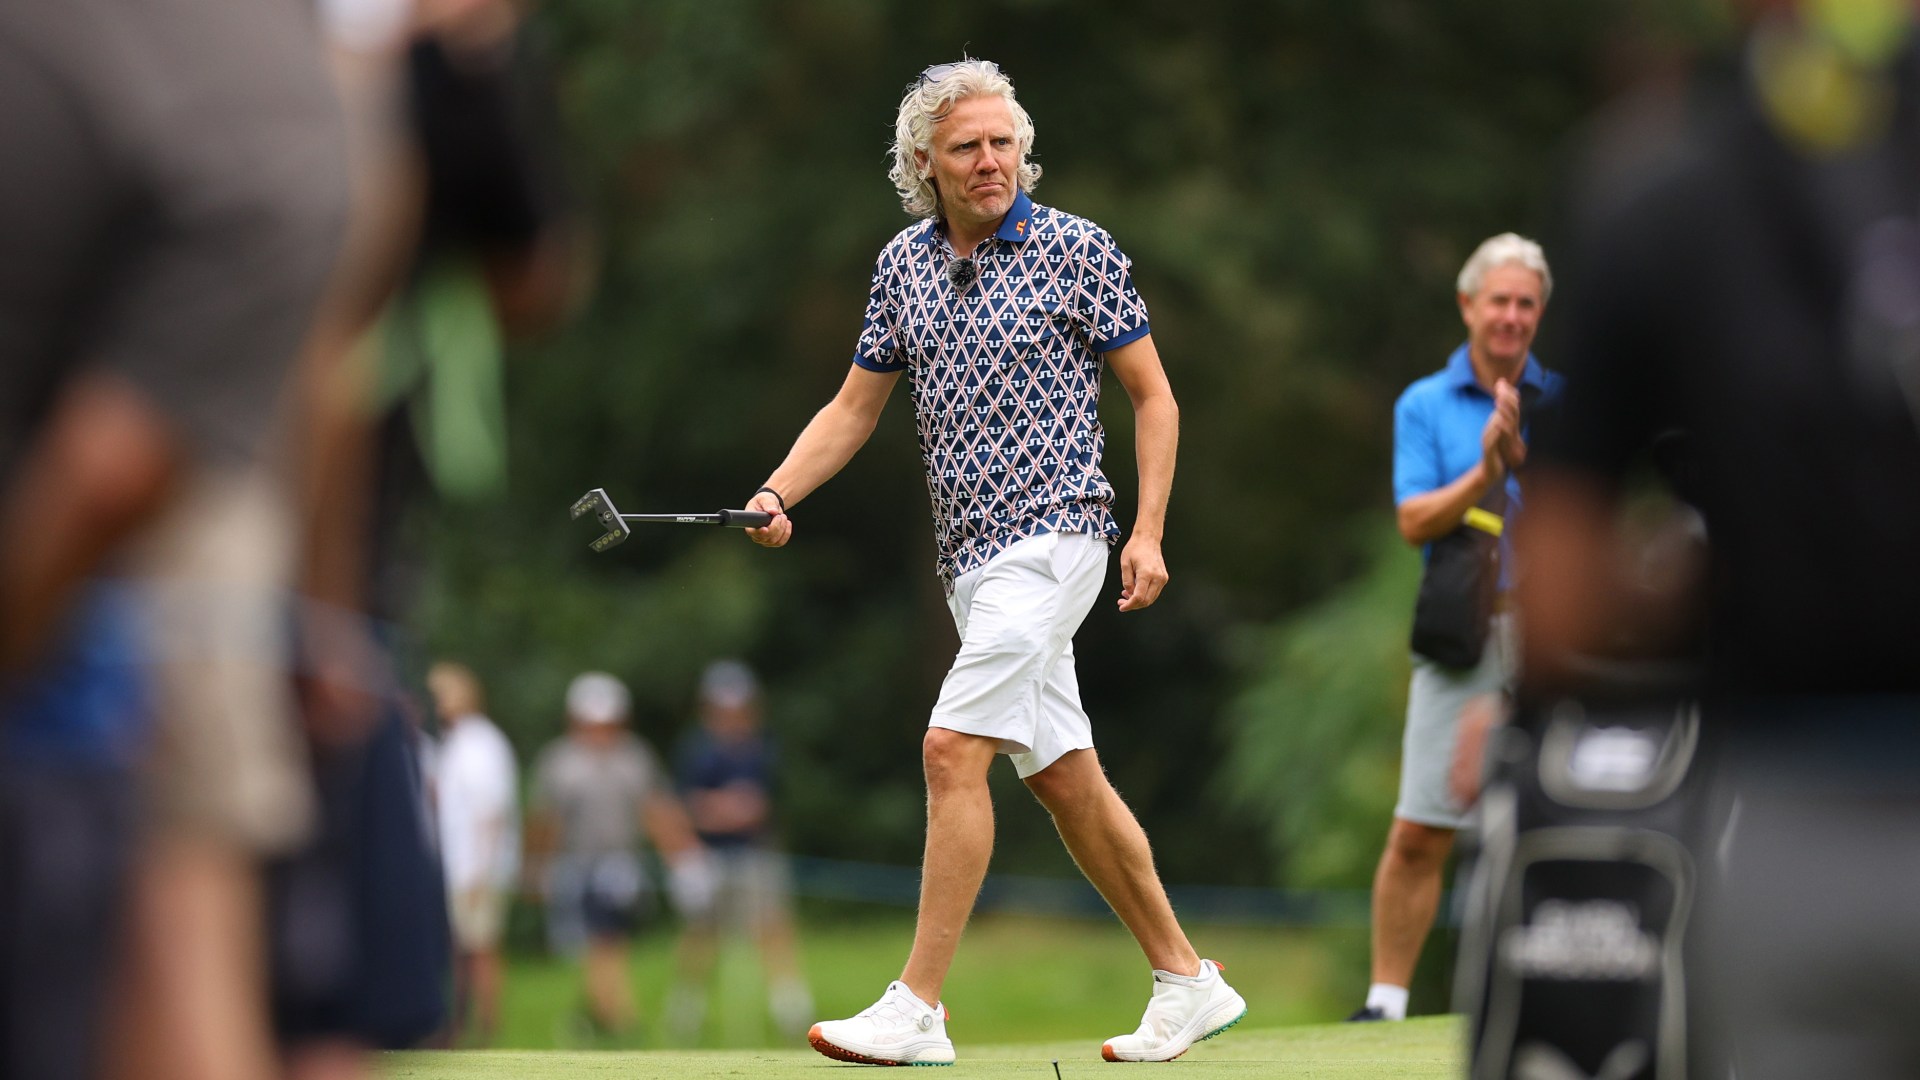 Premier League cult hero and TV star, 45, pulls out of qualifying tournament for place in The Open [Video]